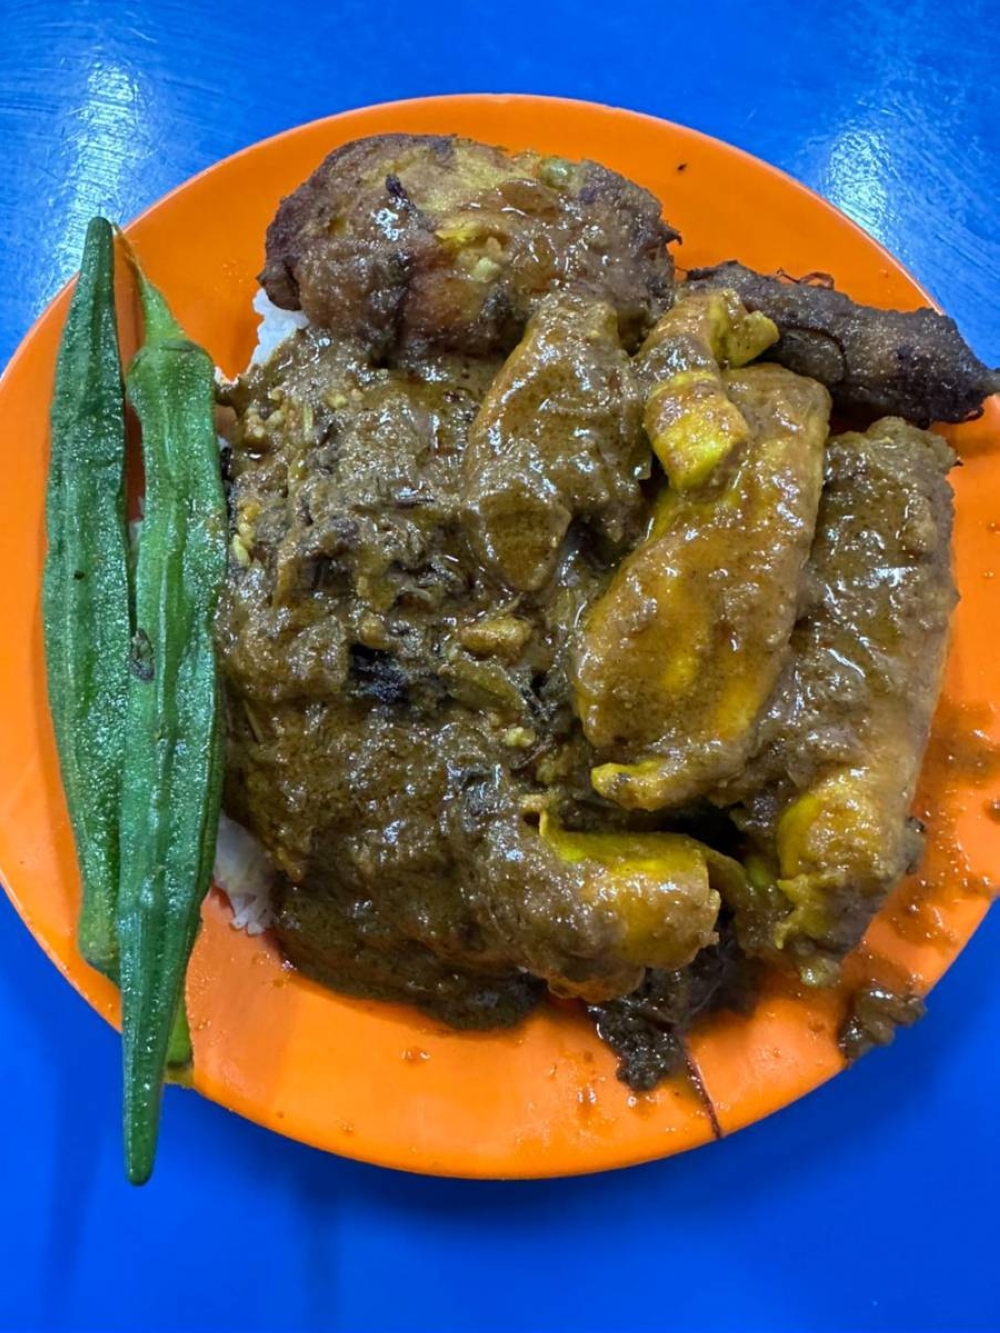 One of the glaring omissions from Penang’s list is ‘nasi kandar’ with its intoxicating mix of curries— Picture by Lee Khang Yi 